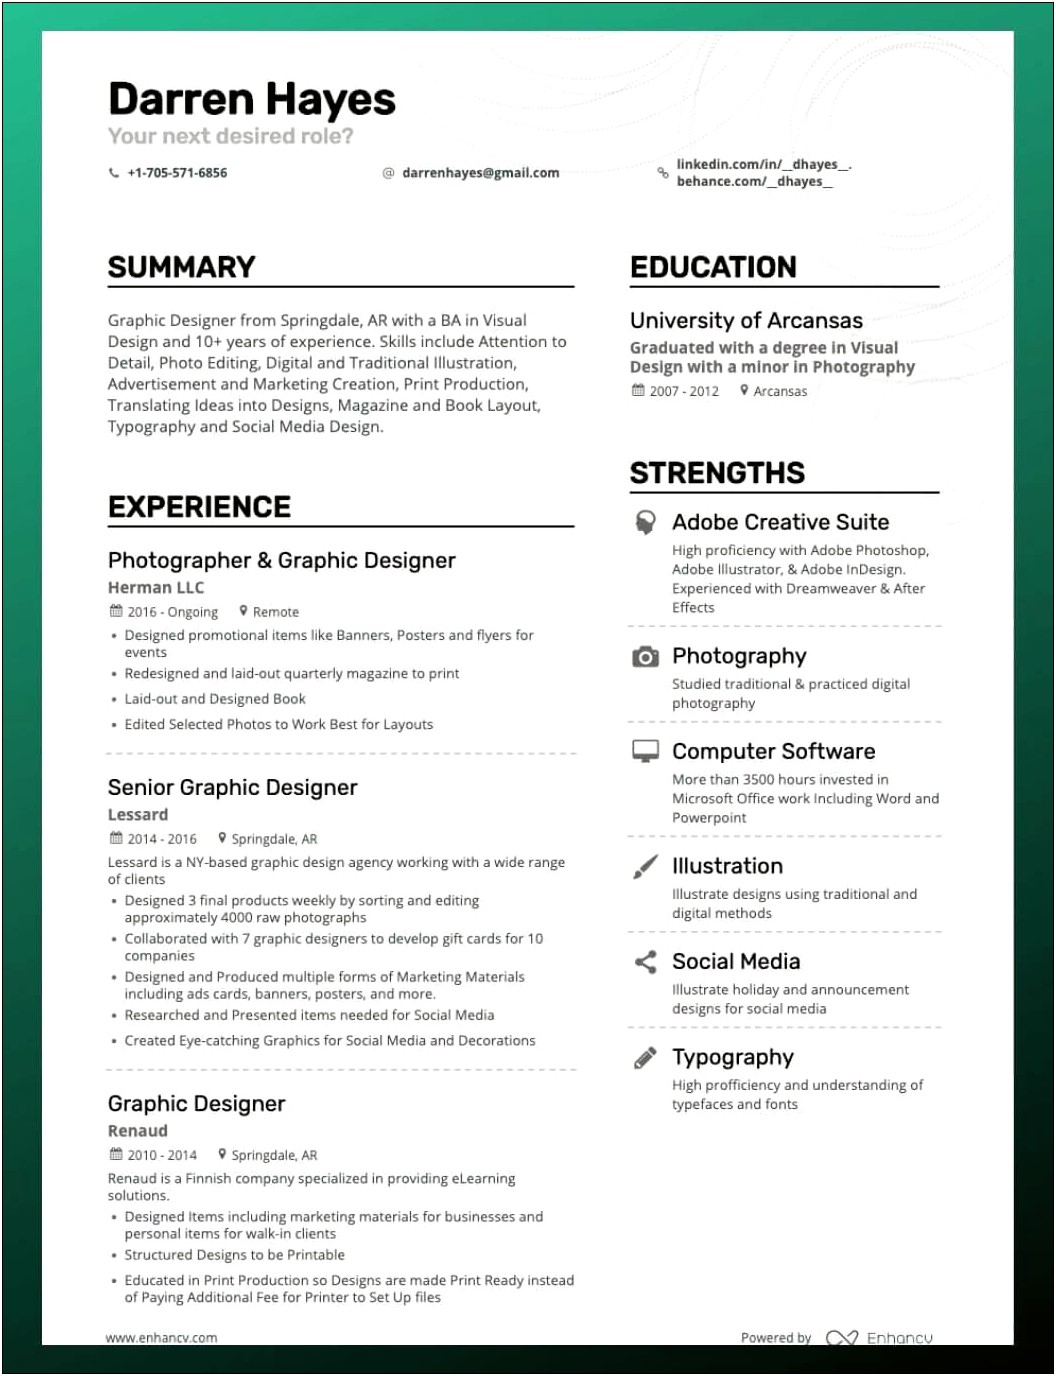 List Of Strengths And Skills For Resume